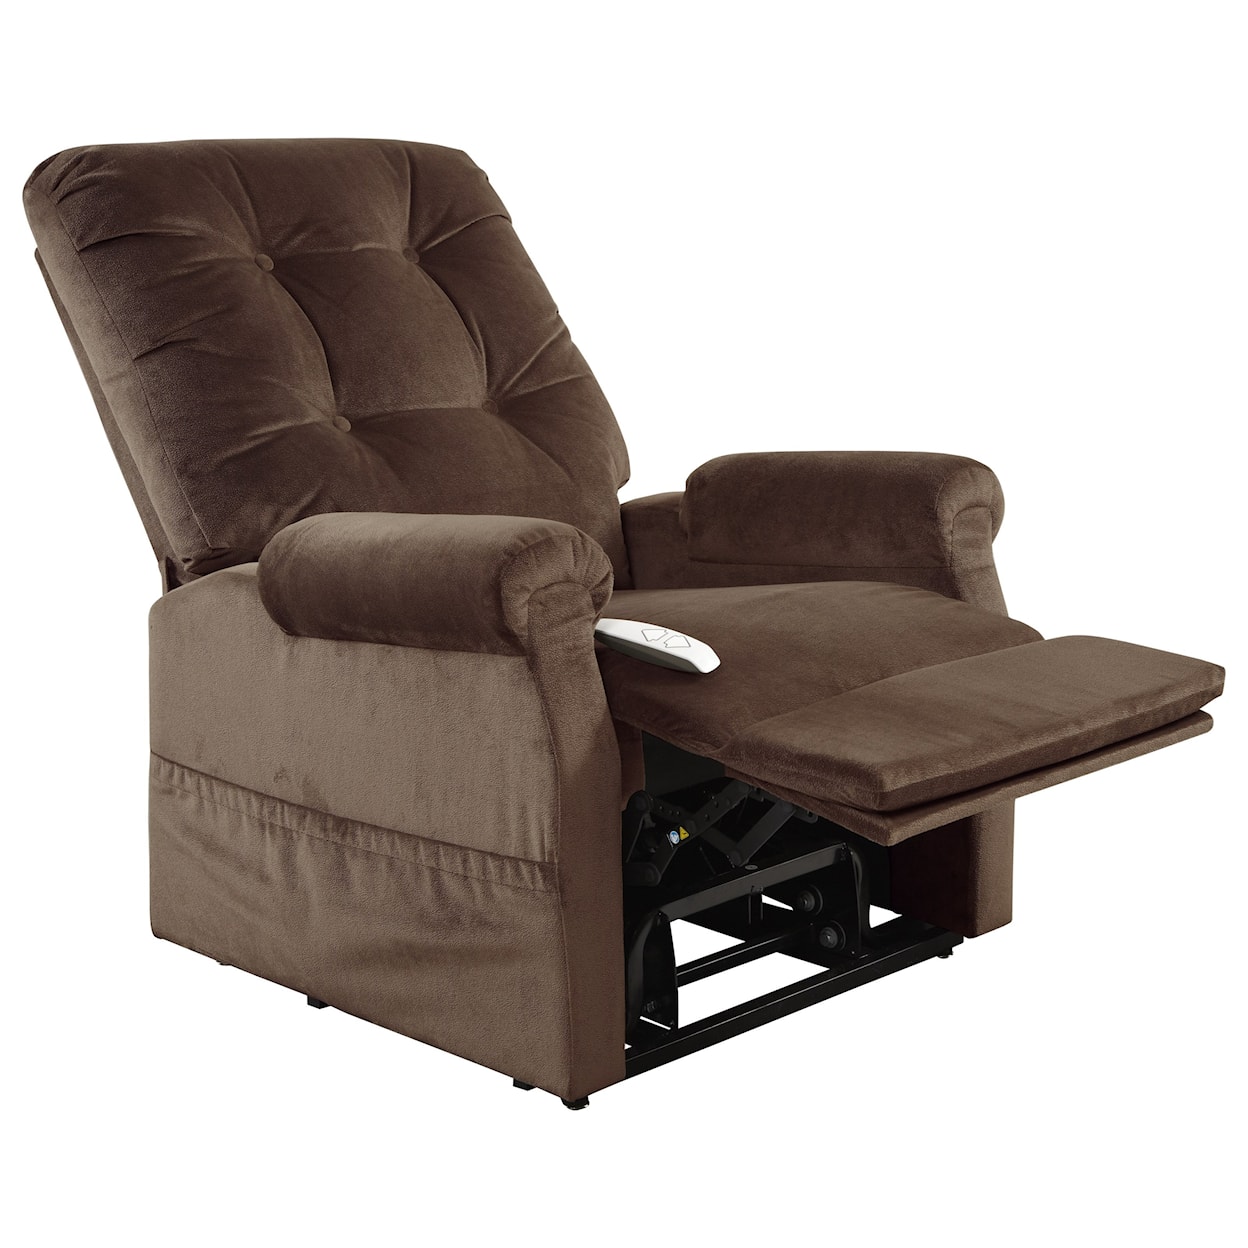 Windermere Motion Lift Chairs 3-Position Reclining Lift Chair